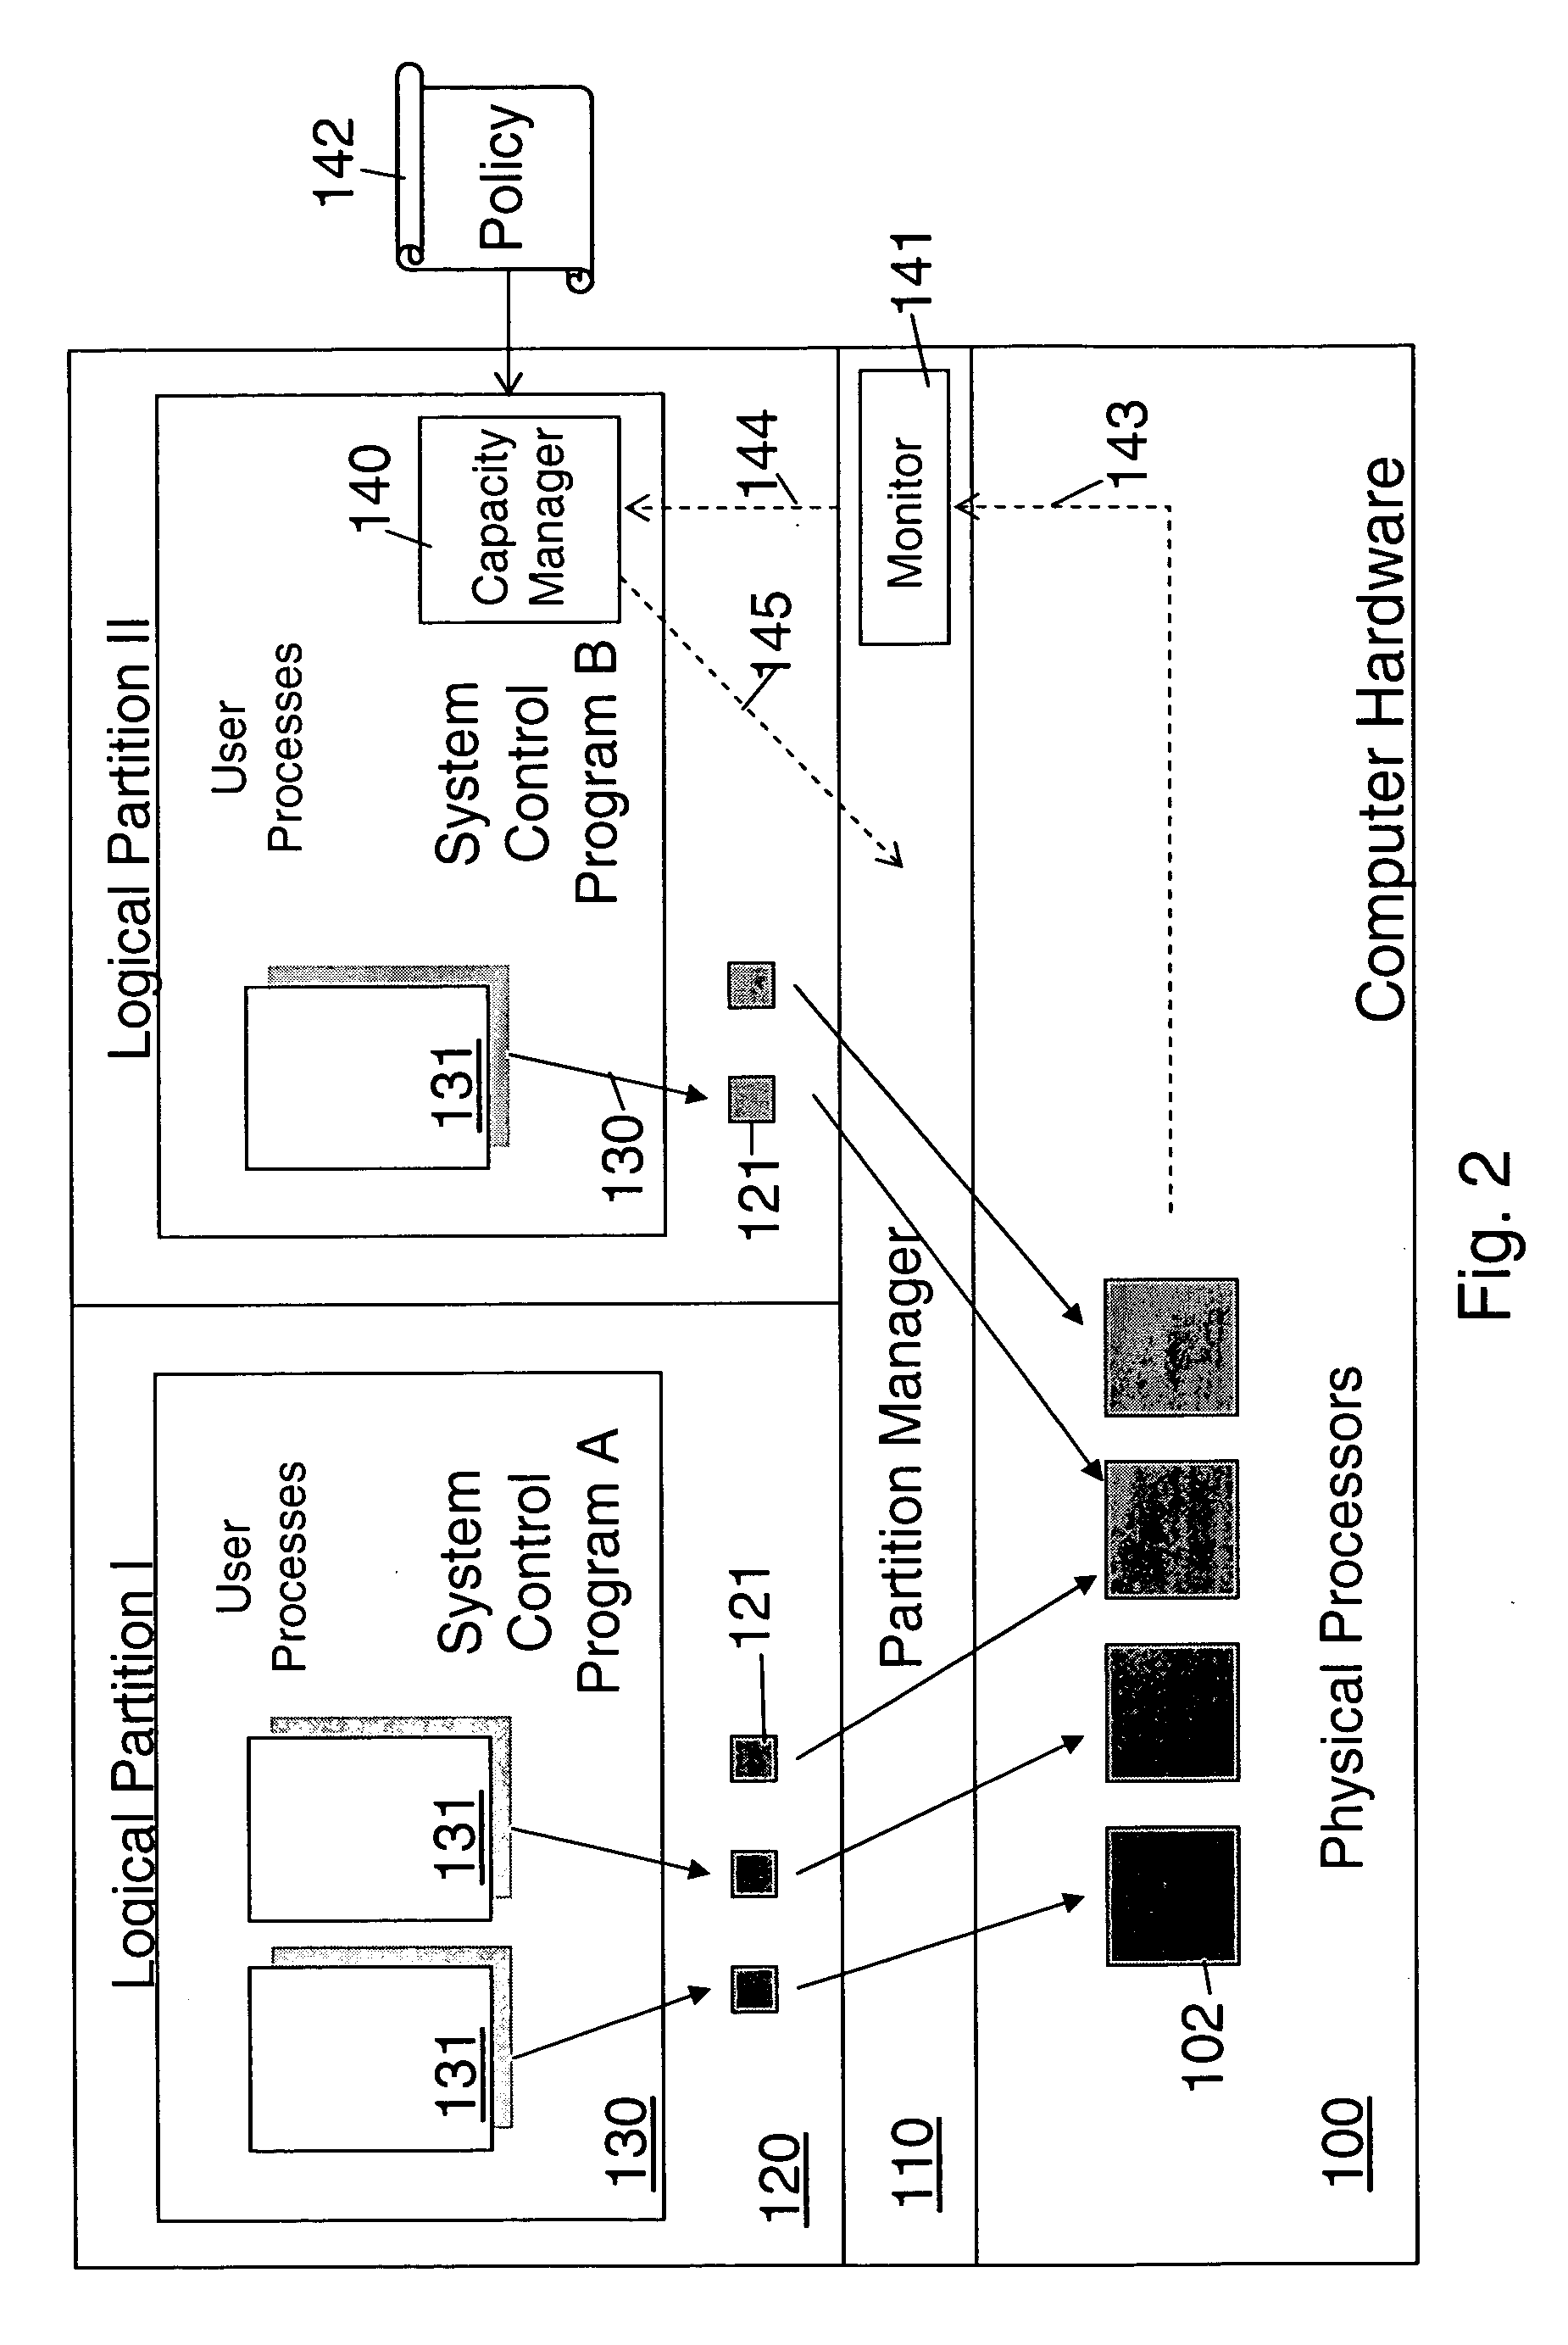 Method and system for controlling the capacity usage of a logically partitioned data processing system